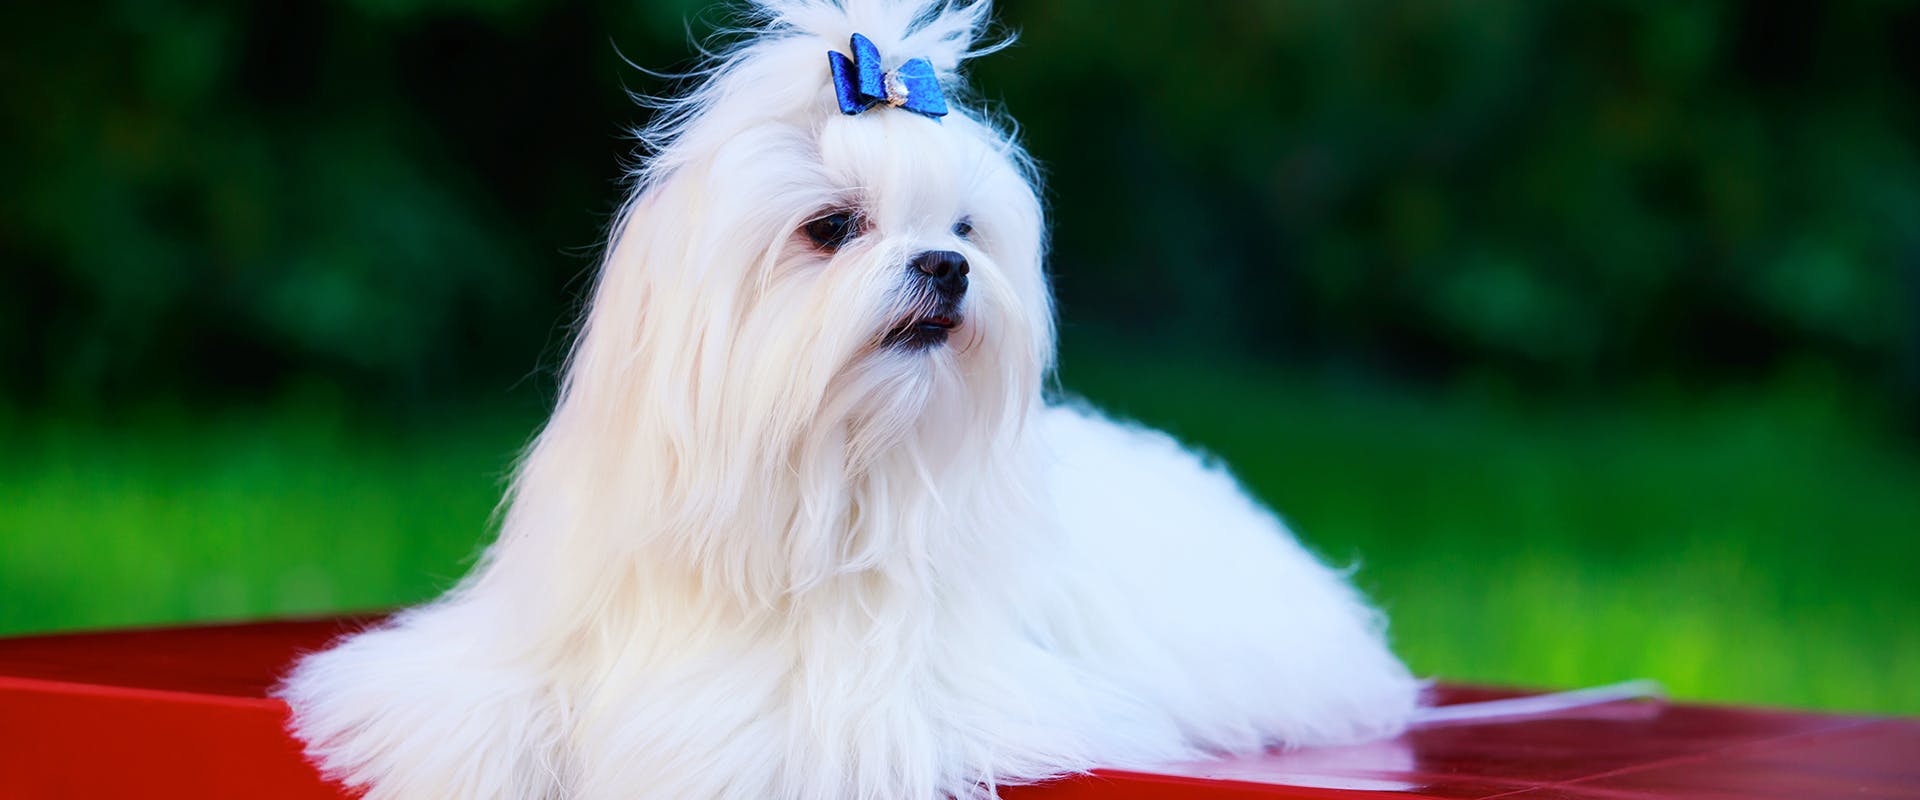 A Matlese dog with a blue ribbon clip in its hair